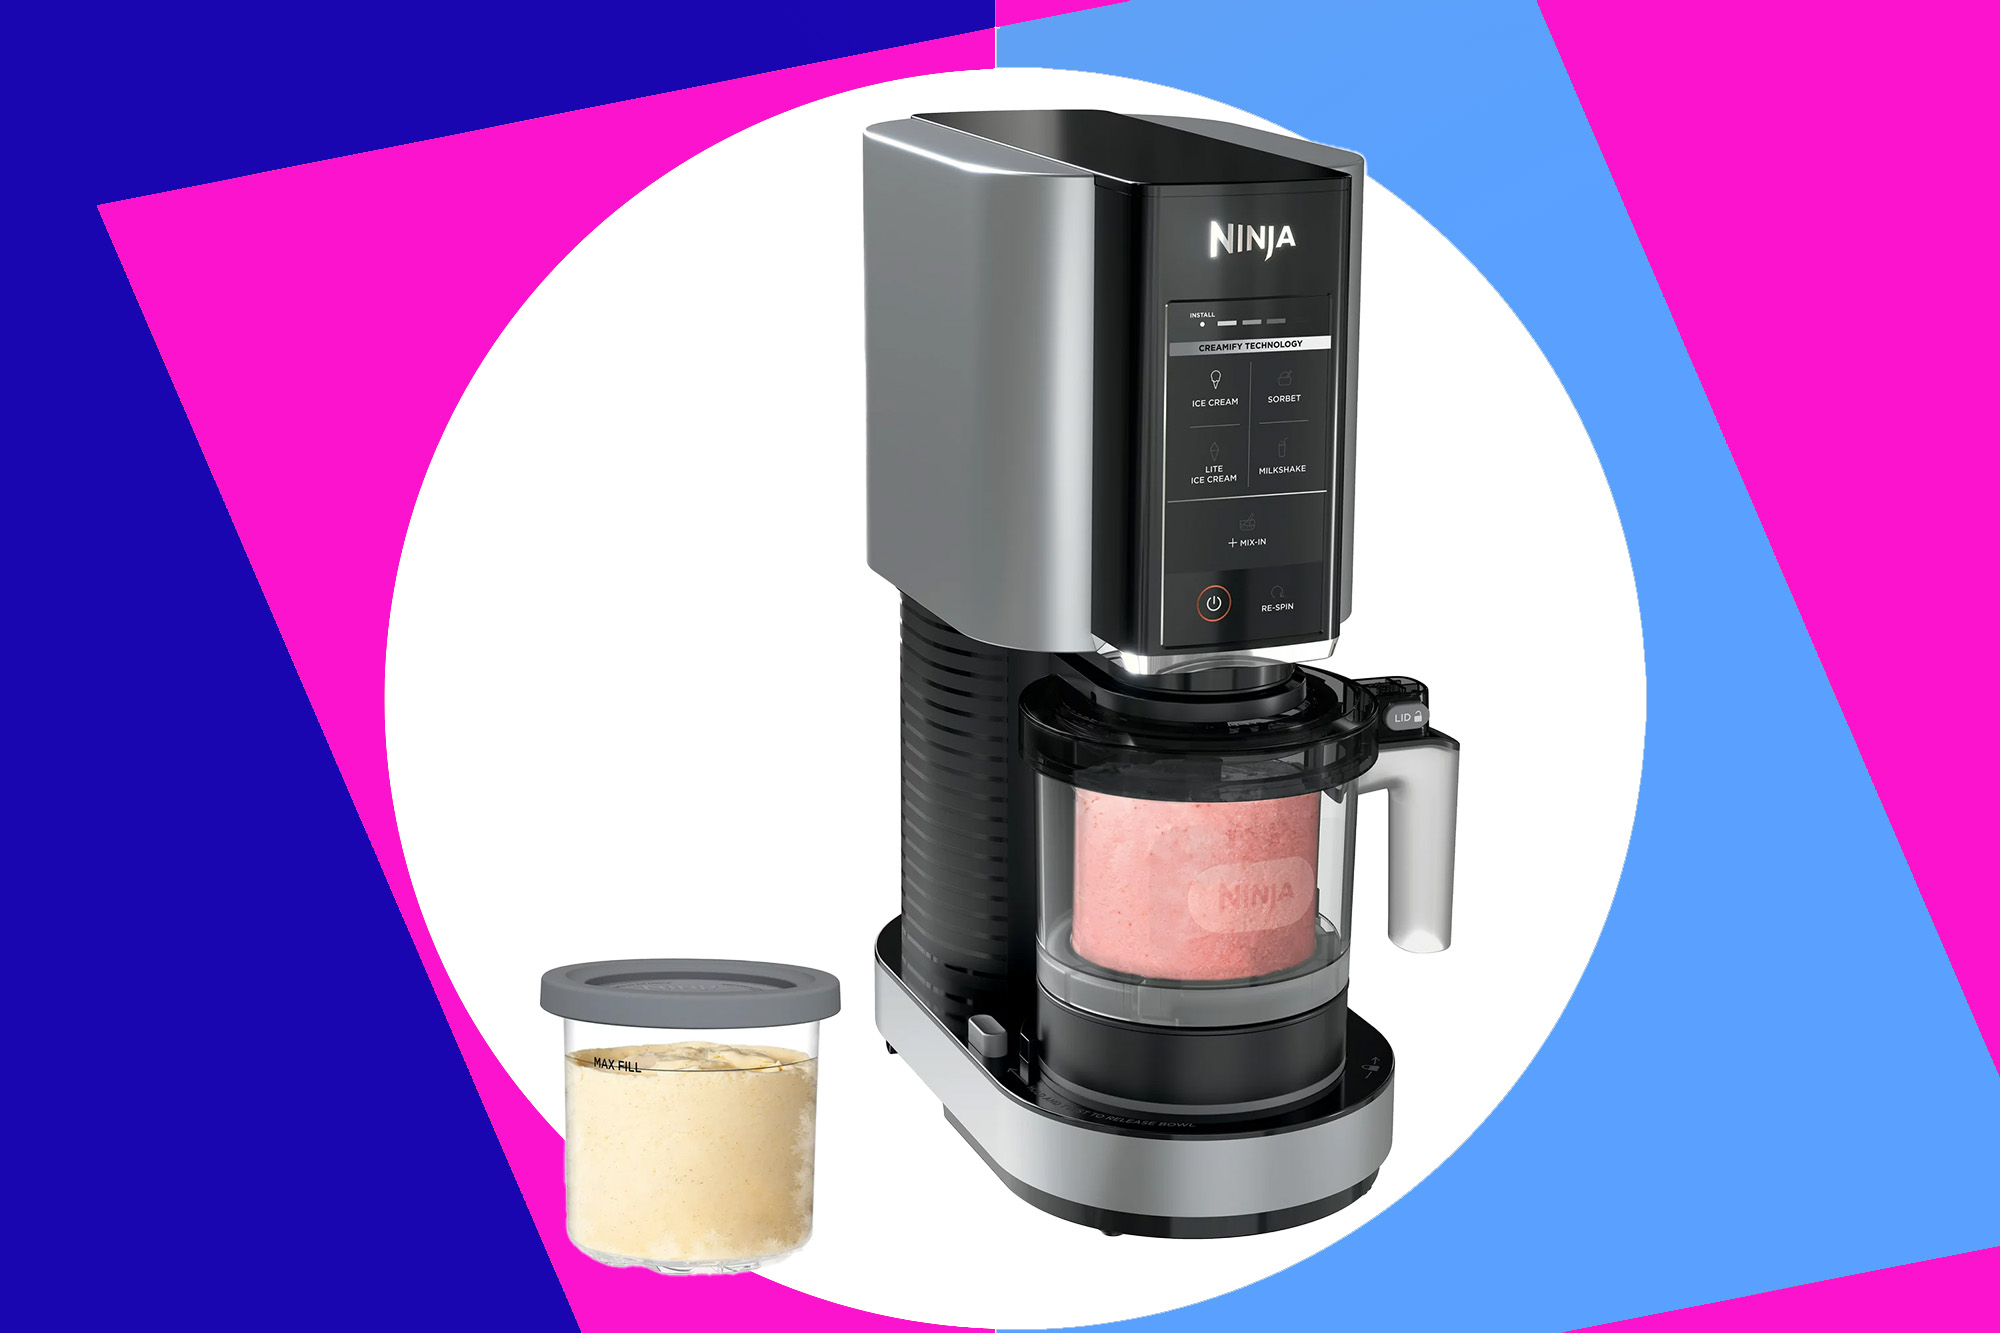 Beat the heat this week with a sweet $50 off the Ninja CREAMi Ice Cream Maker at Walmart